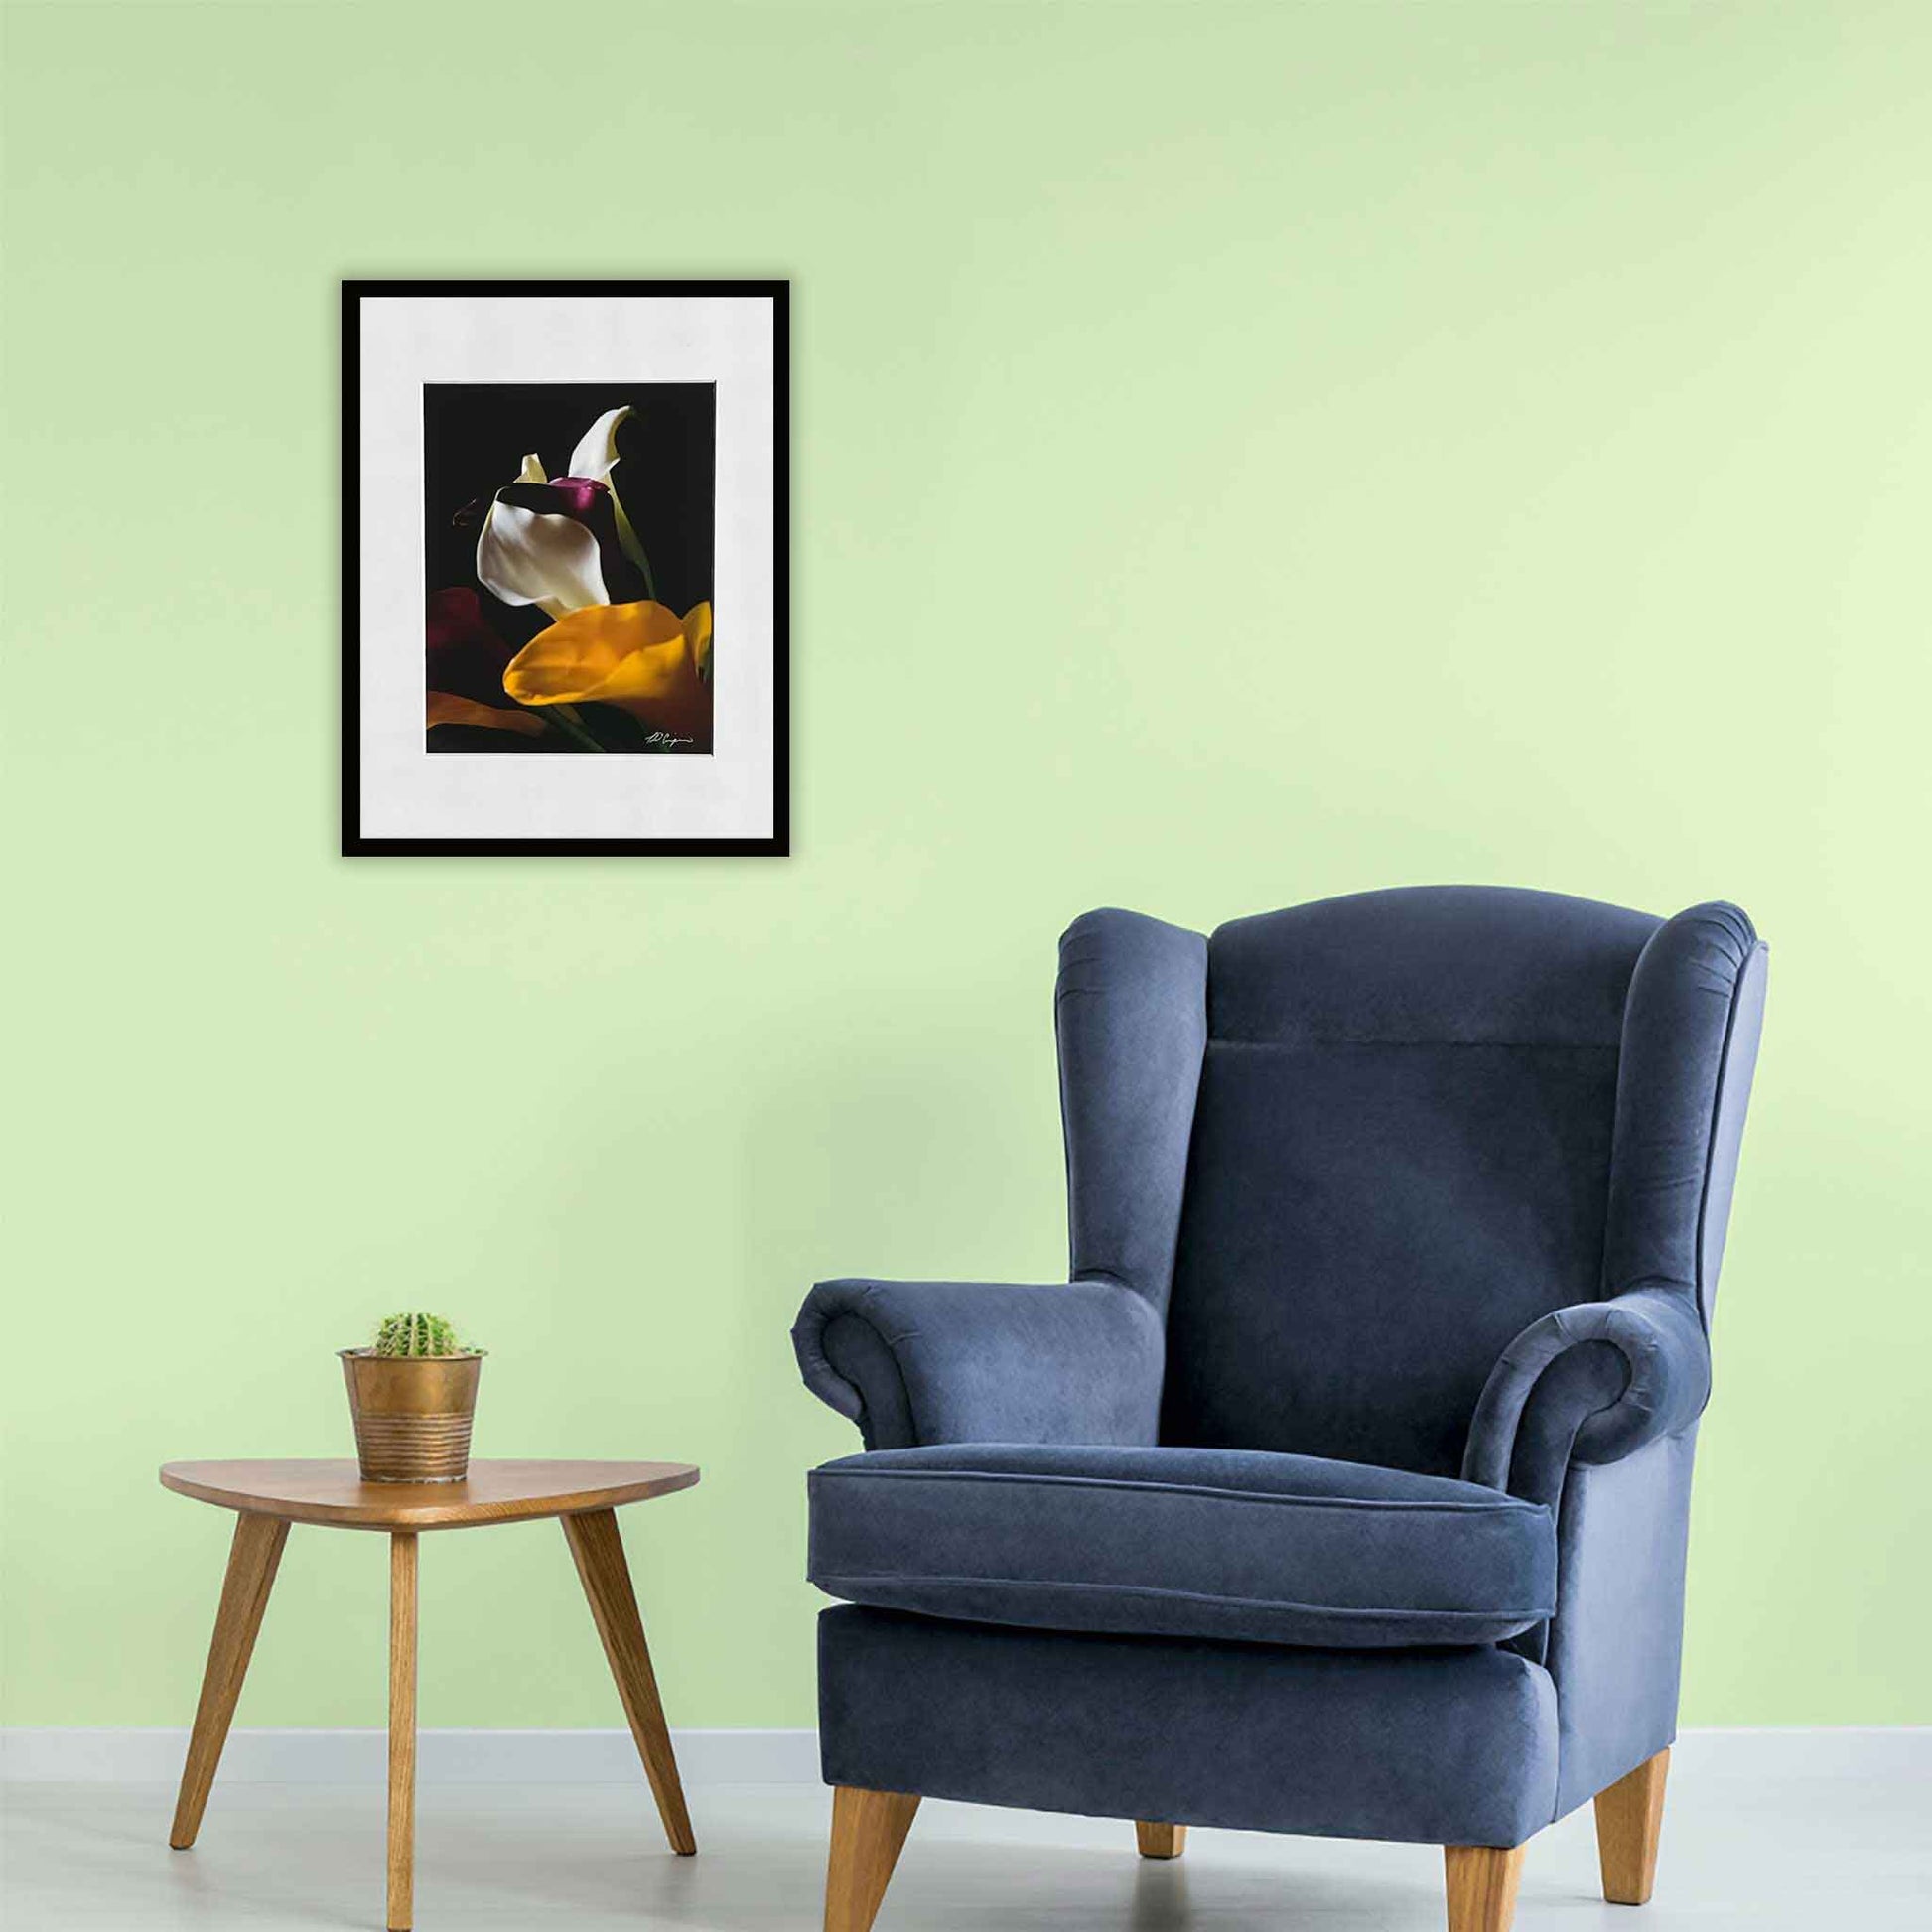 White Calla Lily,  Black Background, Matted Print ,  8X10, matted to 11X14, print, unframed, colorful , Calla Lillies, Charles Dean Carpino